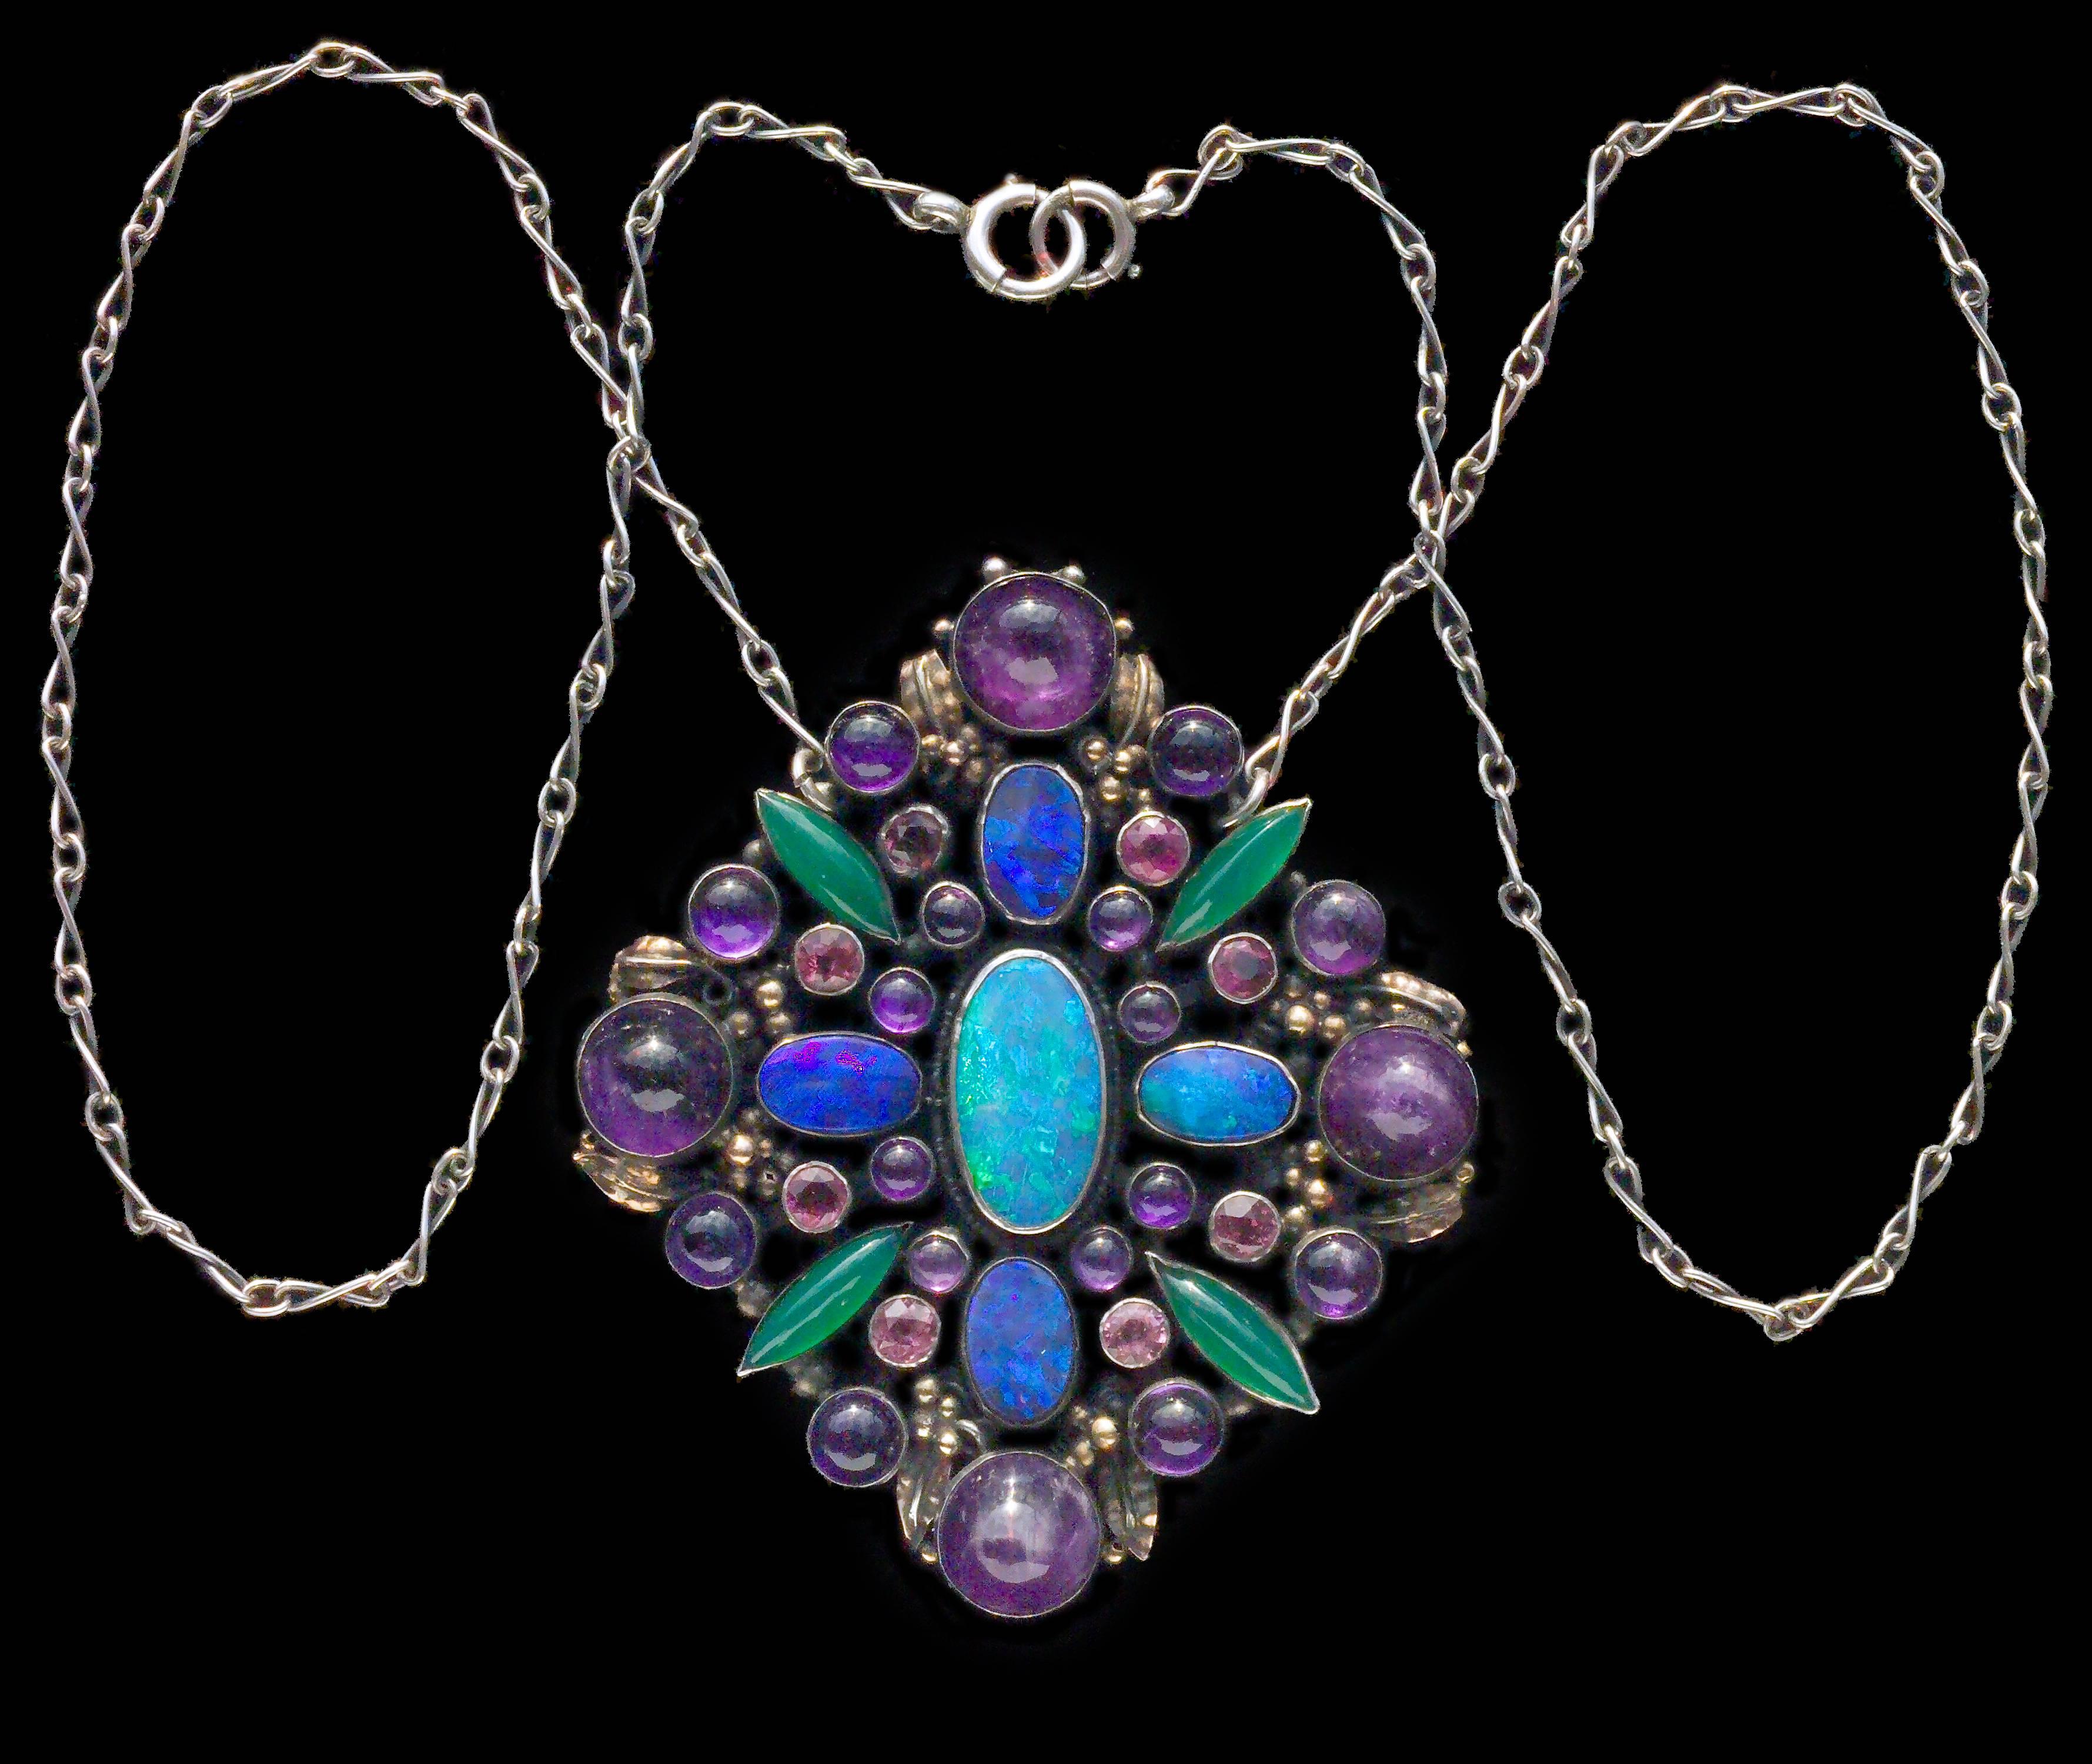 An impressive Arts & Crafts pendant with a sumptuous collection of gemstones. 